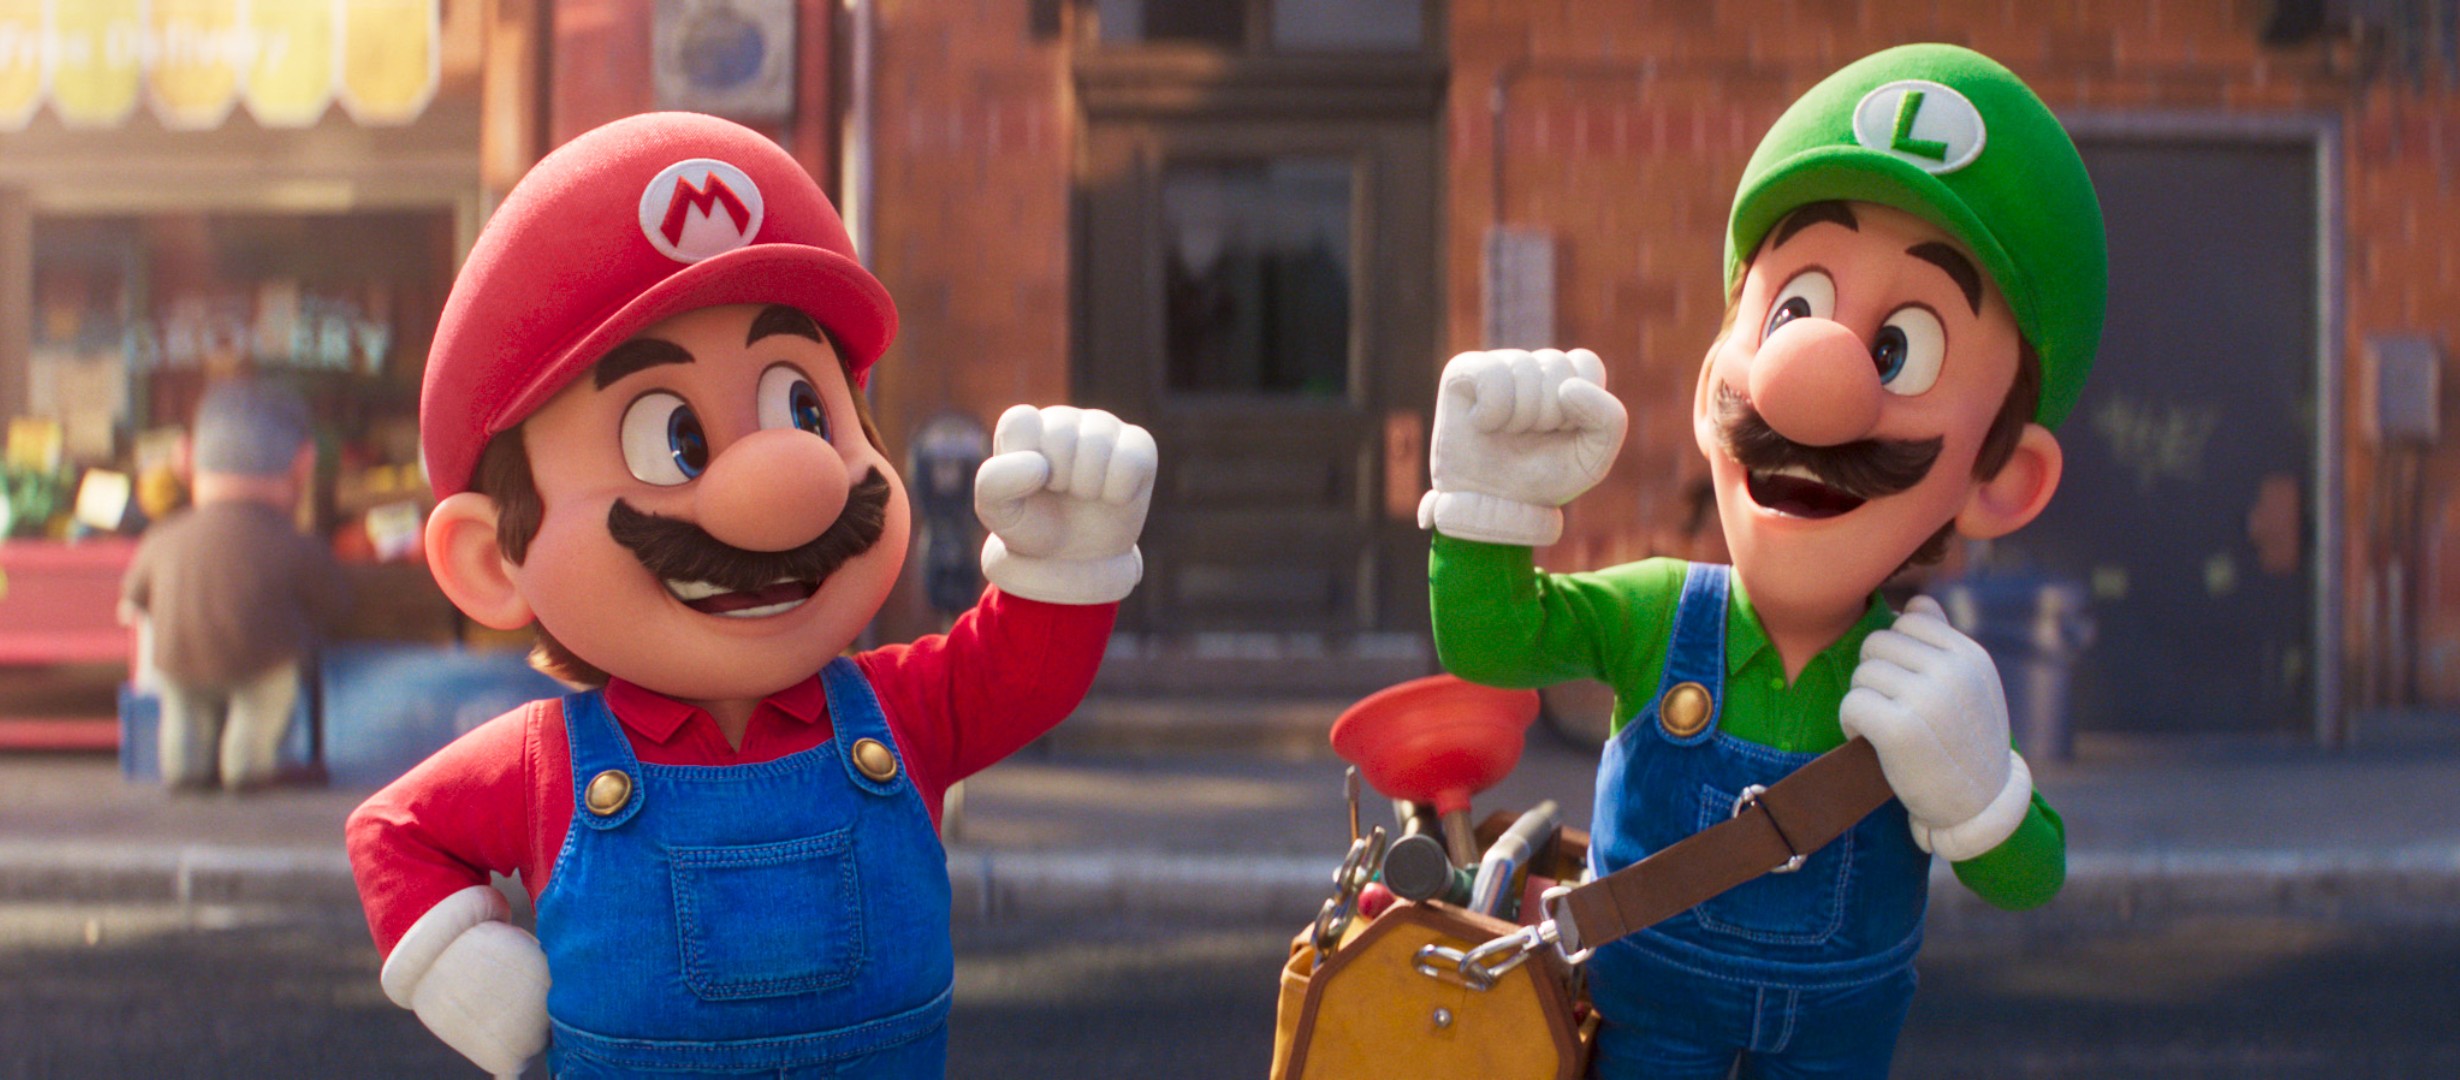 Mario and Luigi smiling throwing their fist in the air in celebration